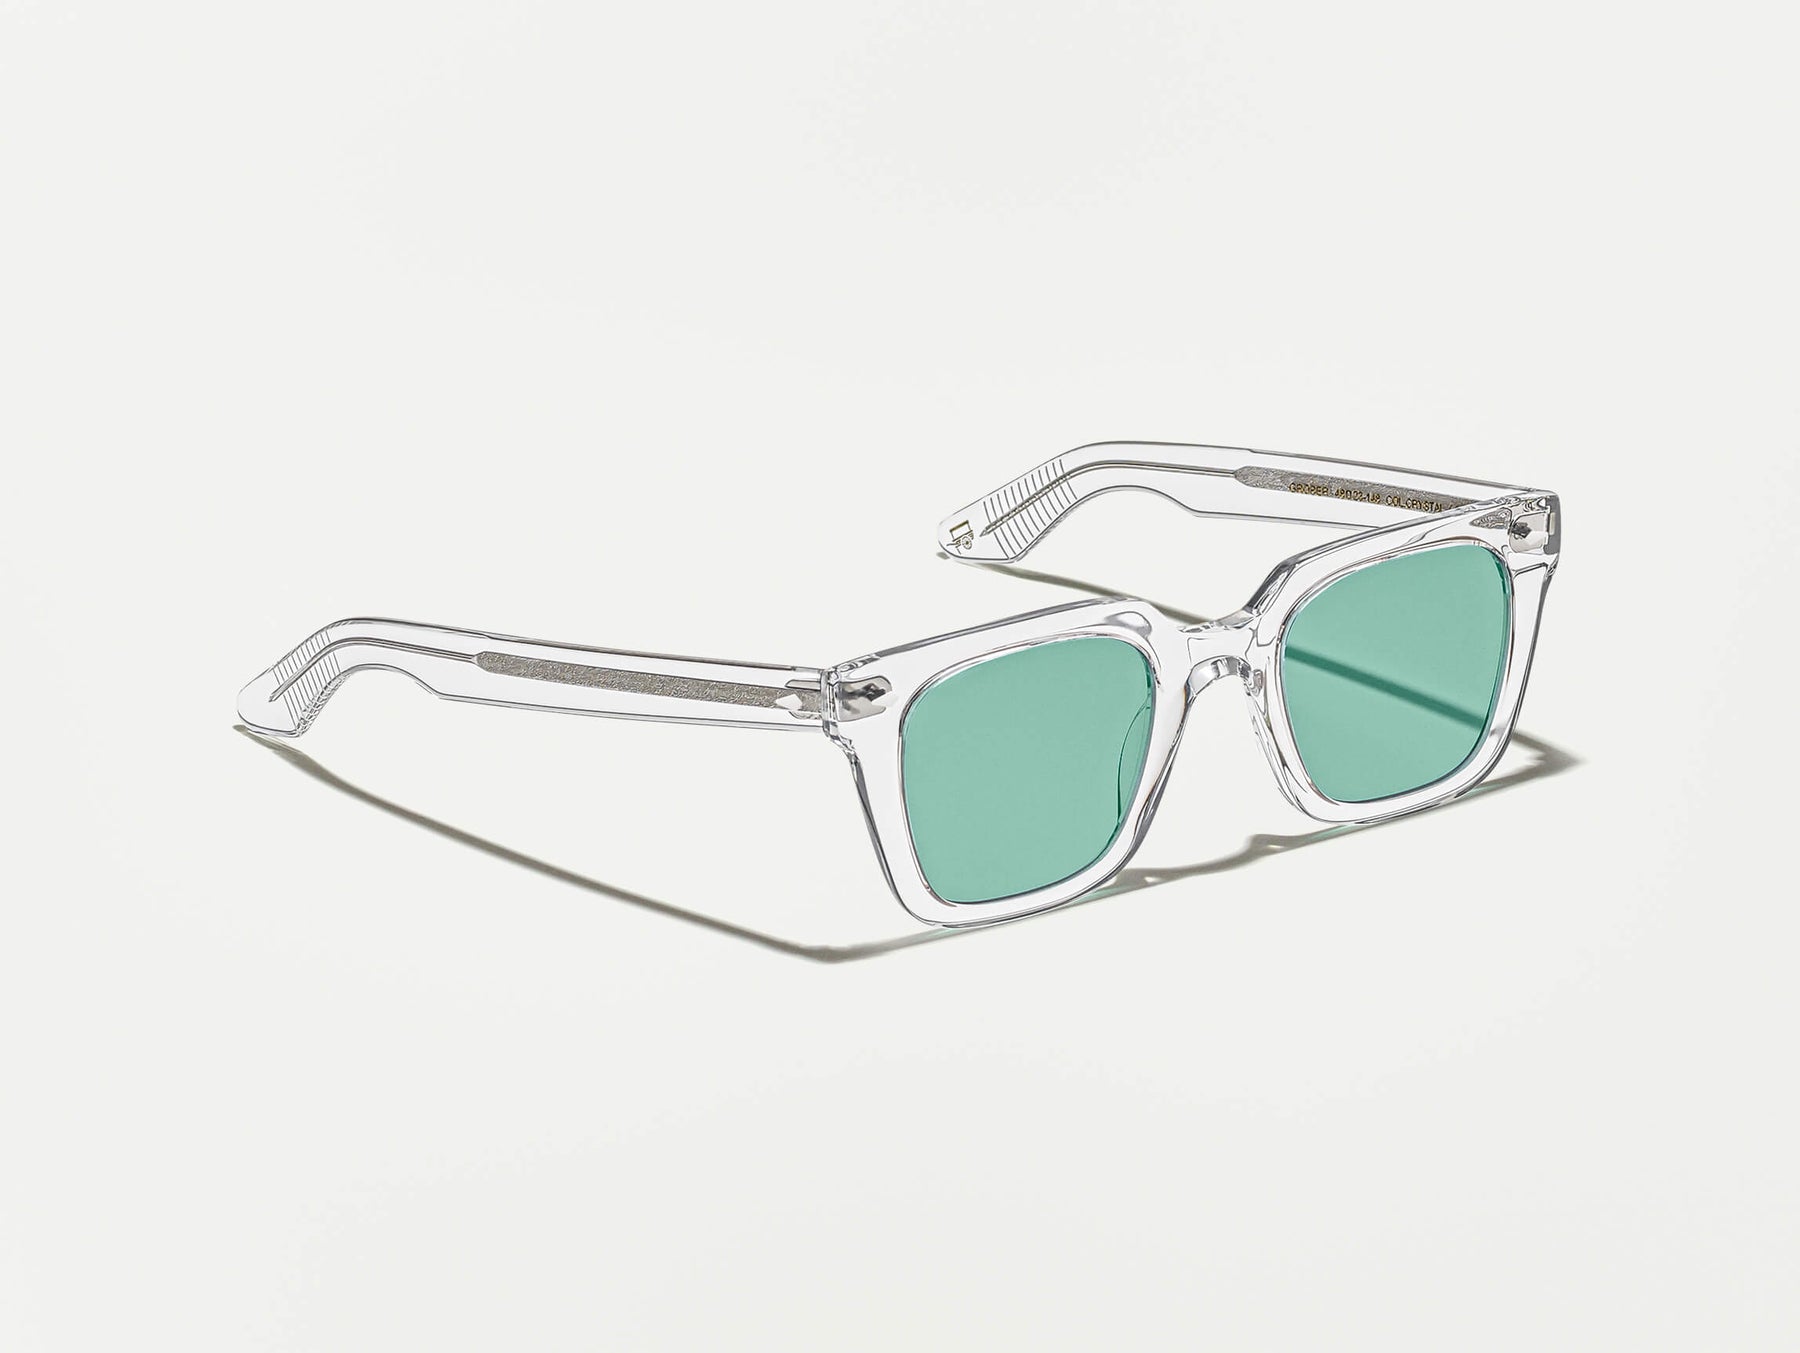 The GROBER Crystal with Turquoise Tinted Lenses